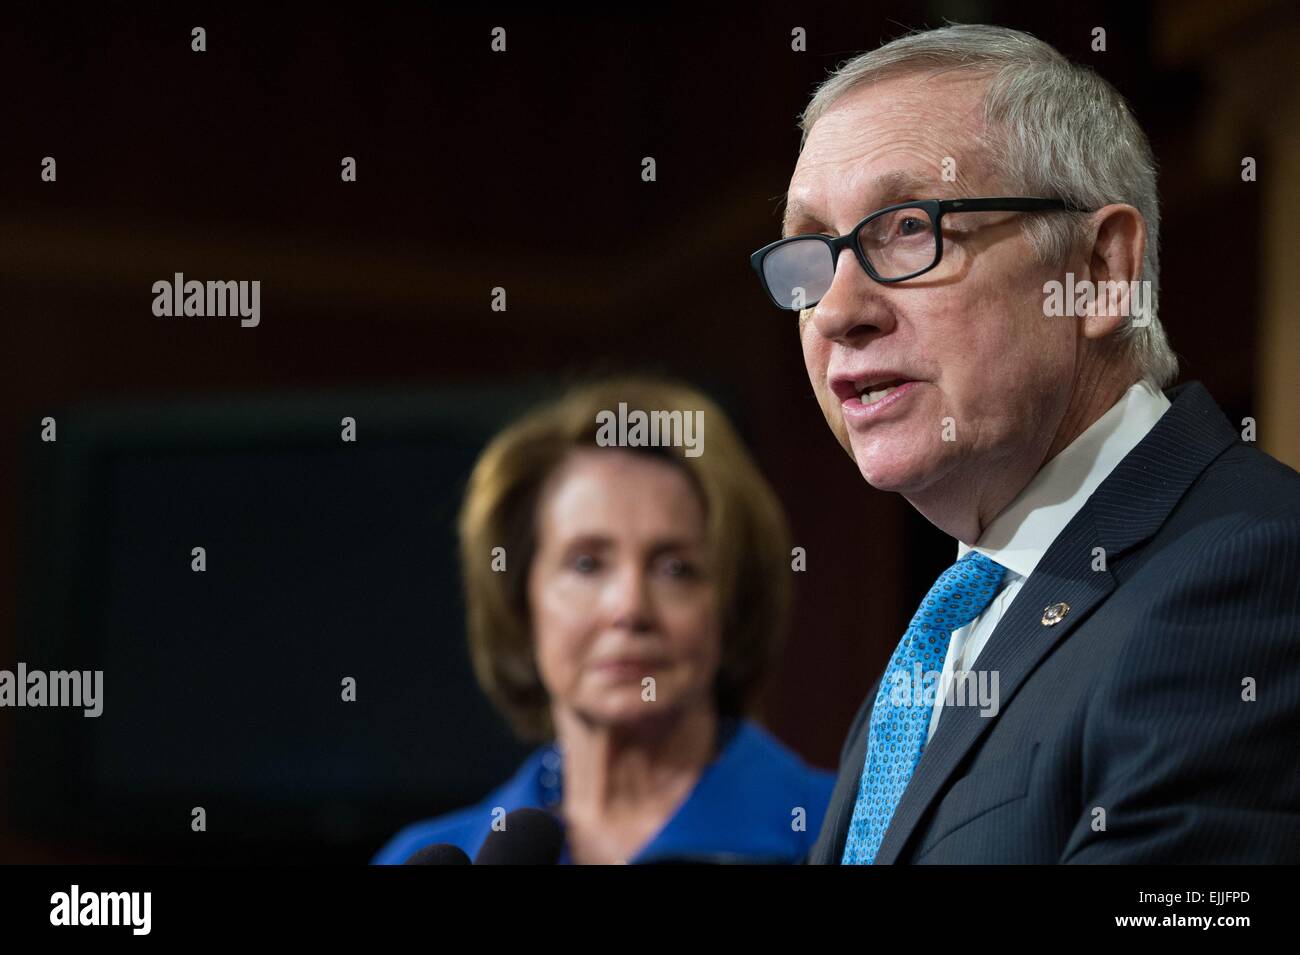 US Democratic Senate Leader Harry Reid medical glasses over his injured eye during a press conference February 26, 2015 in Washington, DC. The 75-year-old Reid suffered an accident while exercising on New YearÕs Day resulting in four broken ribs and may leave him permanently blind in one eye. Stock Photo